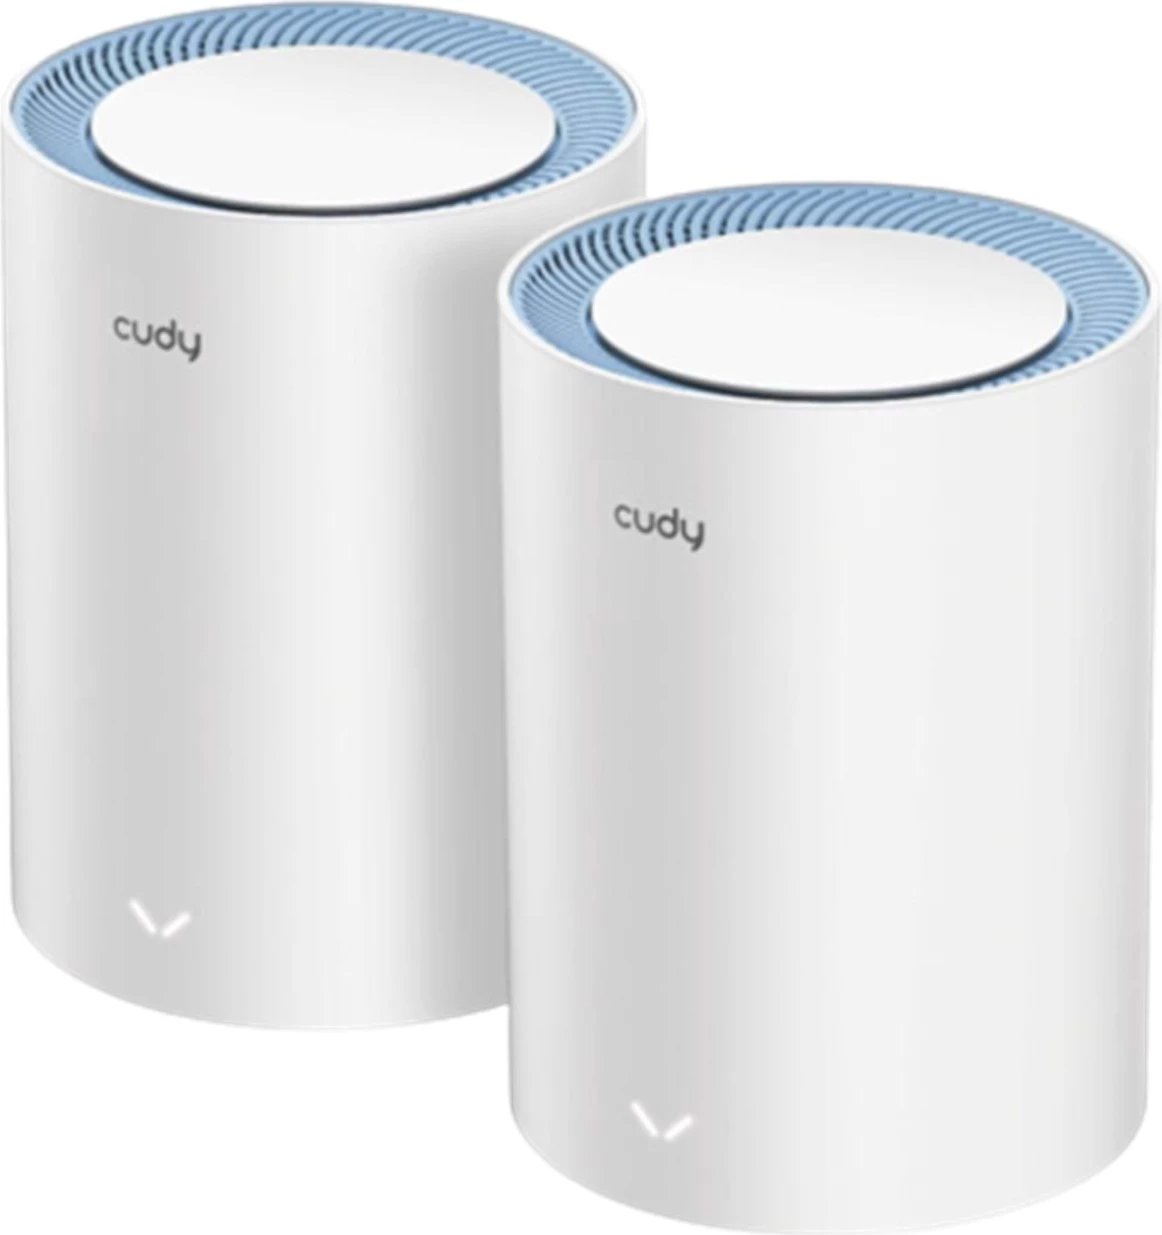 AC1200 Wi-Fi Mesh Solution M1200 (2-Pack)